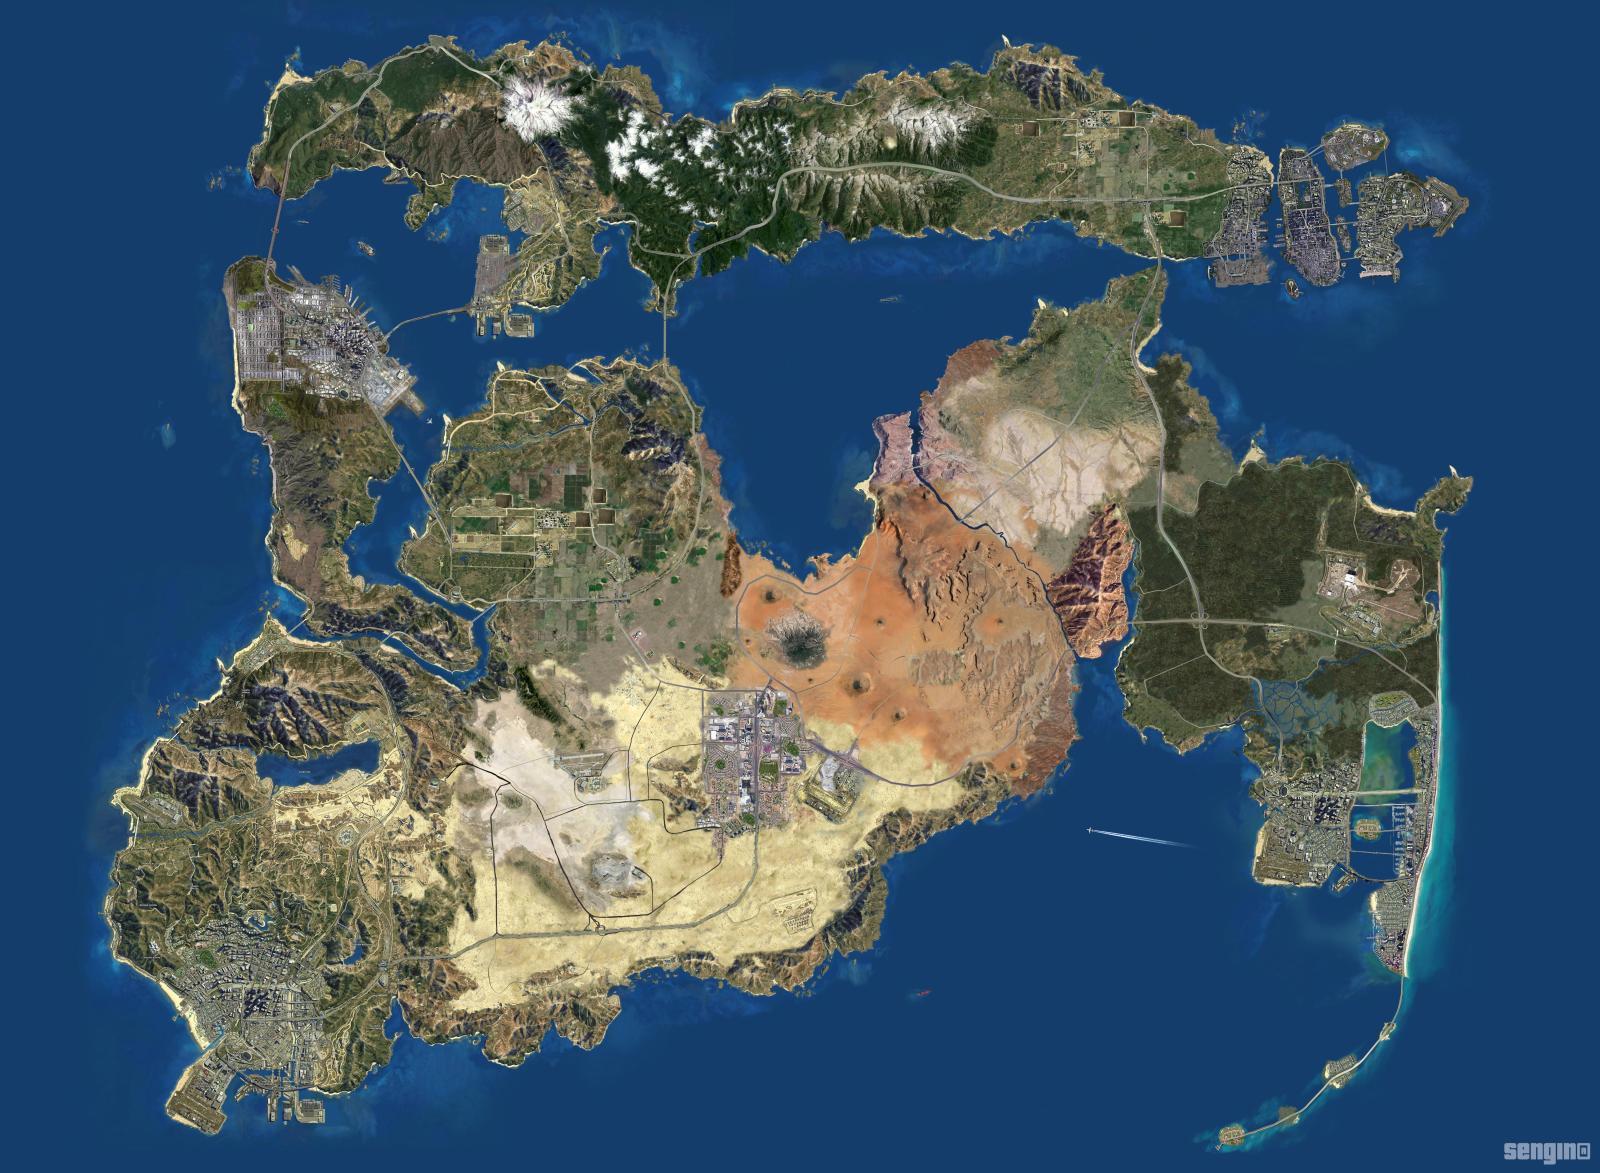 GTA 6 Unofficial Fan-made Map - All Locations in one GTA